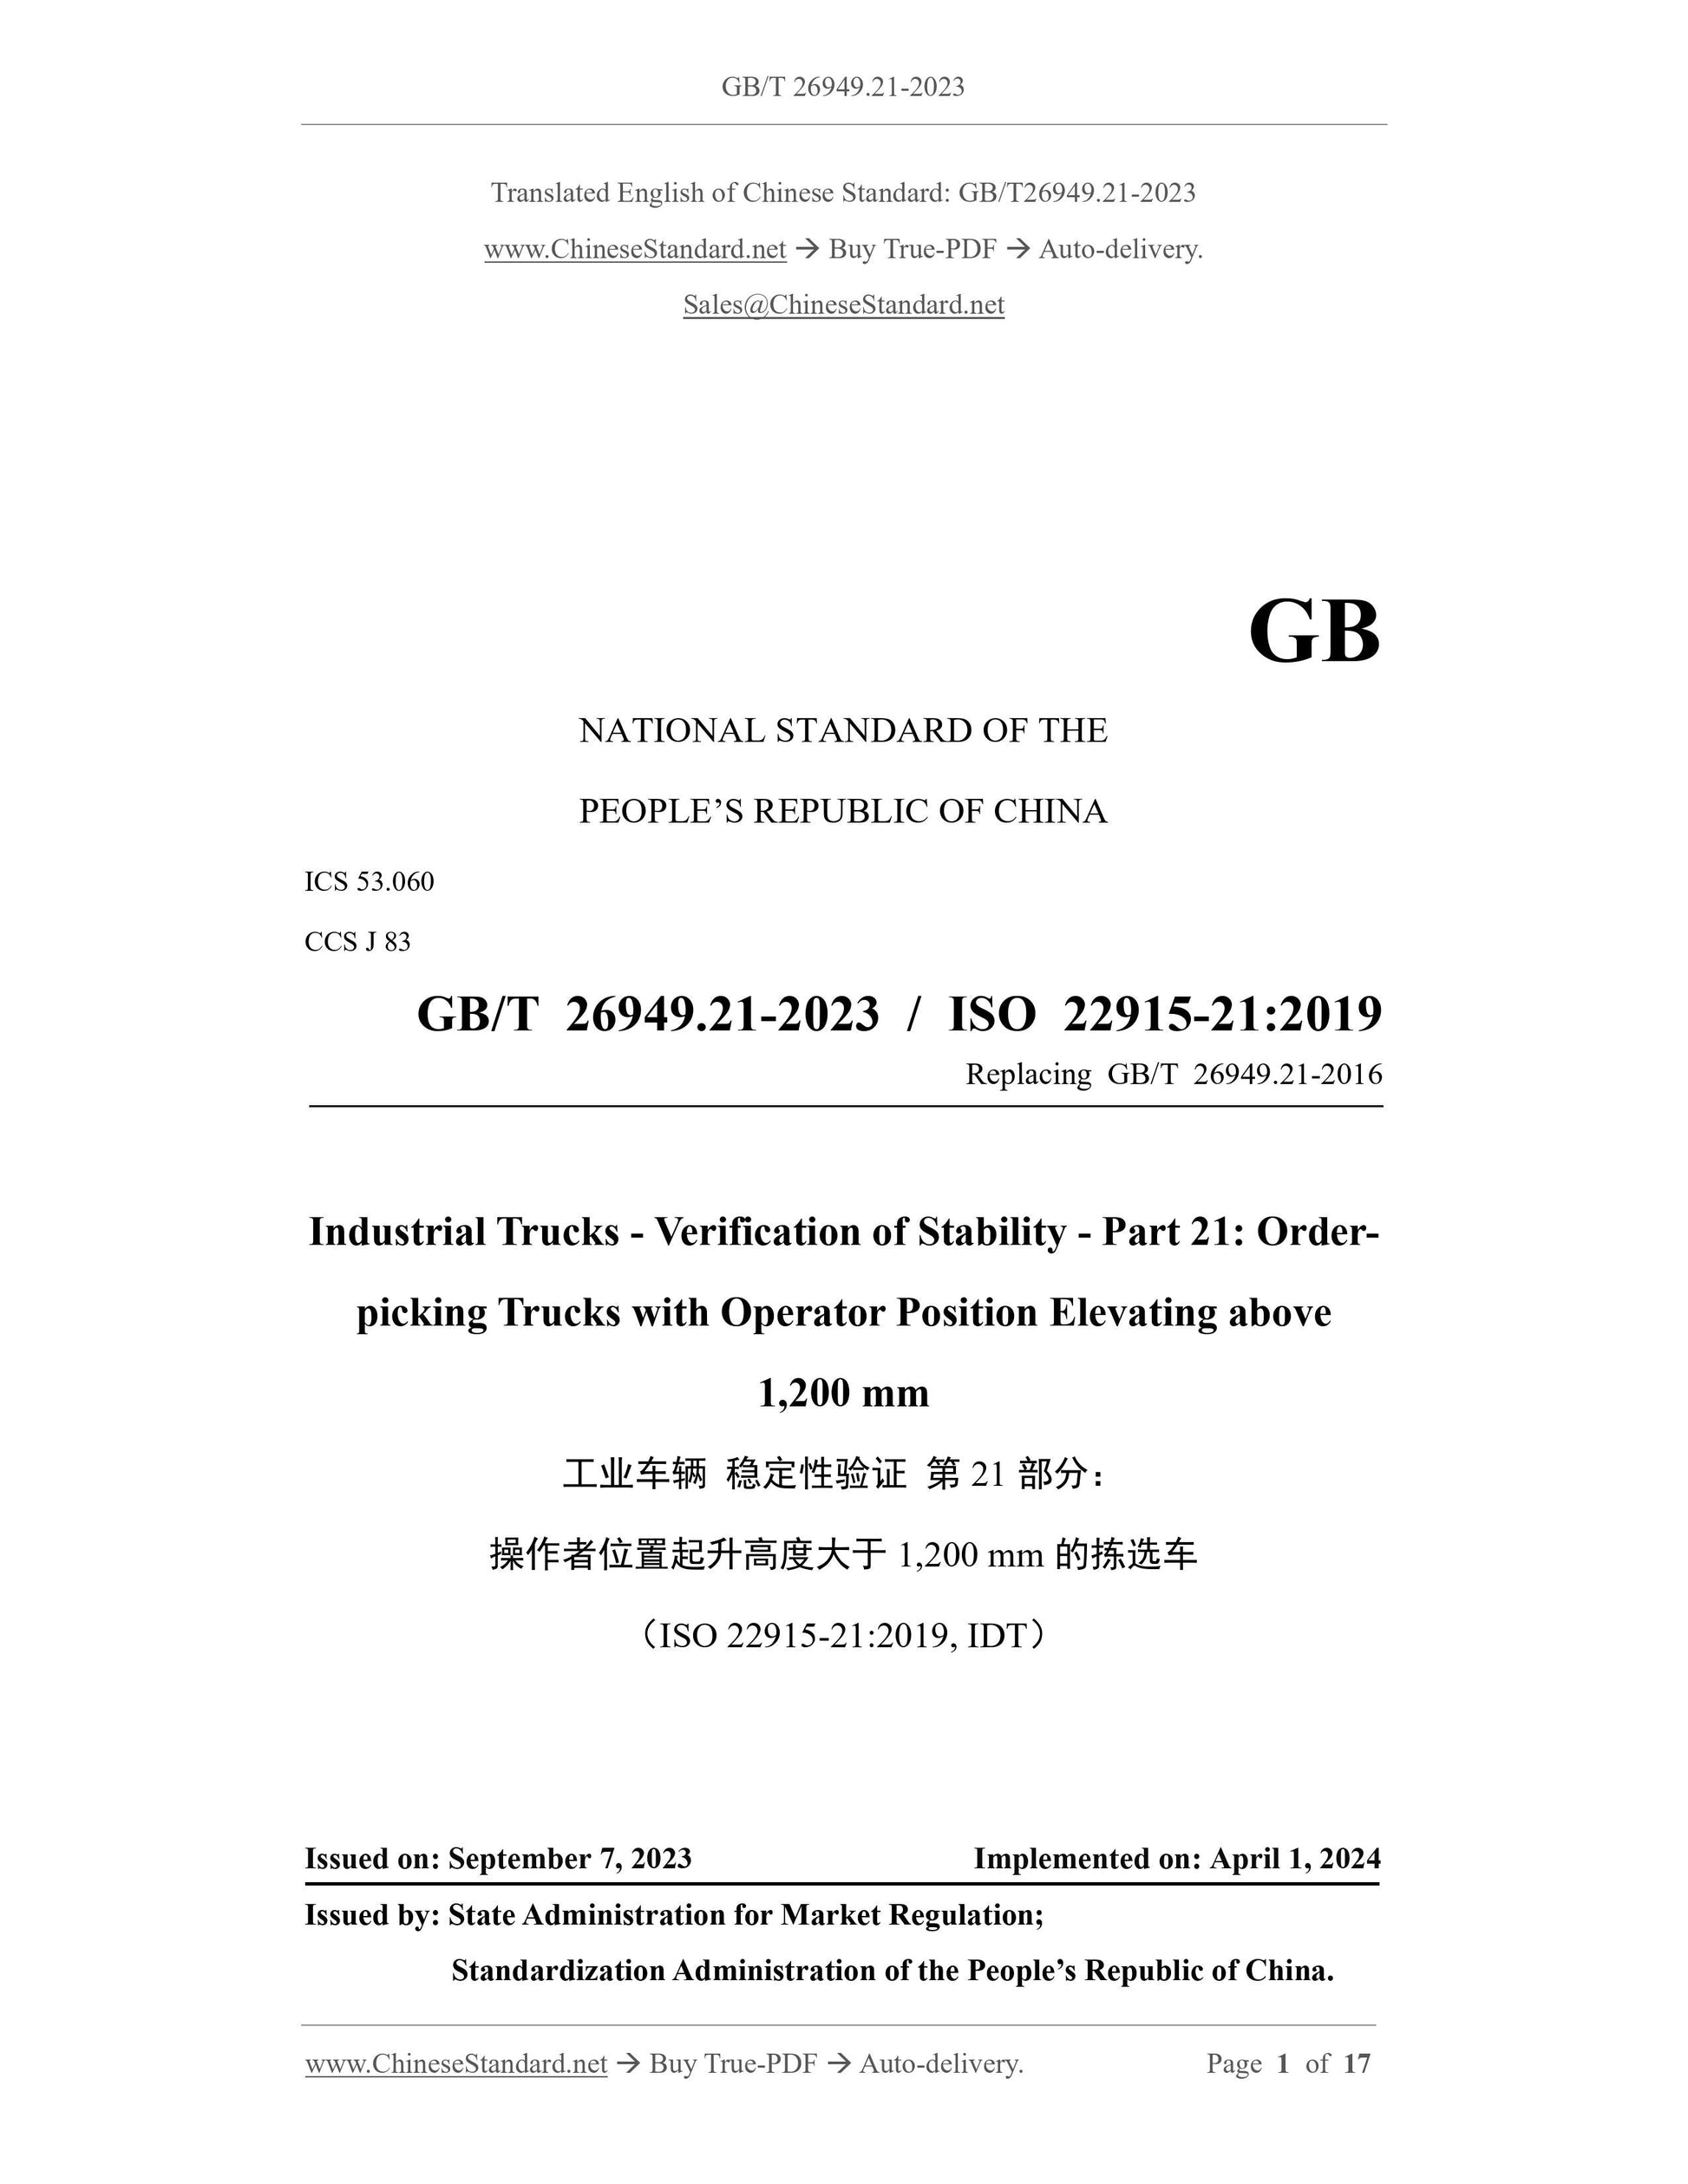 GB/T 26949.21-2023 Page 1